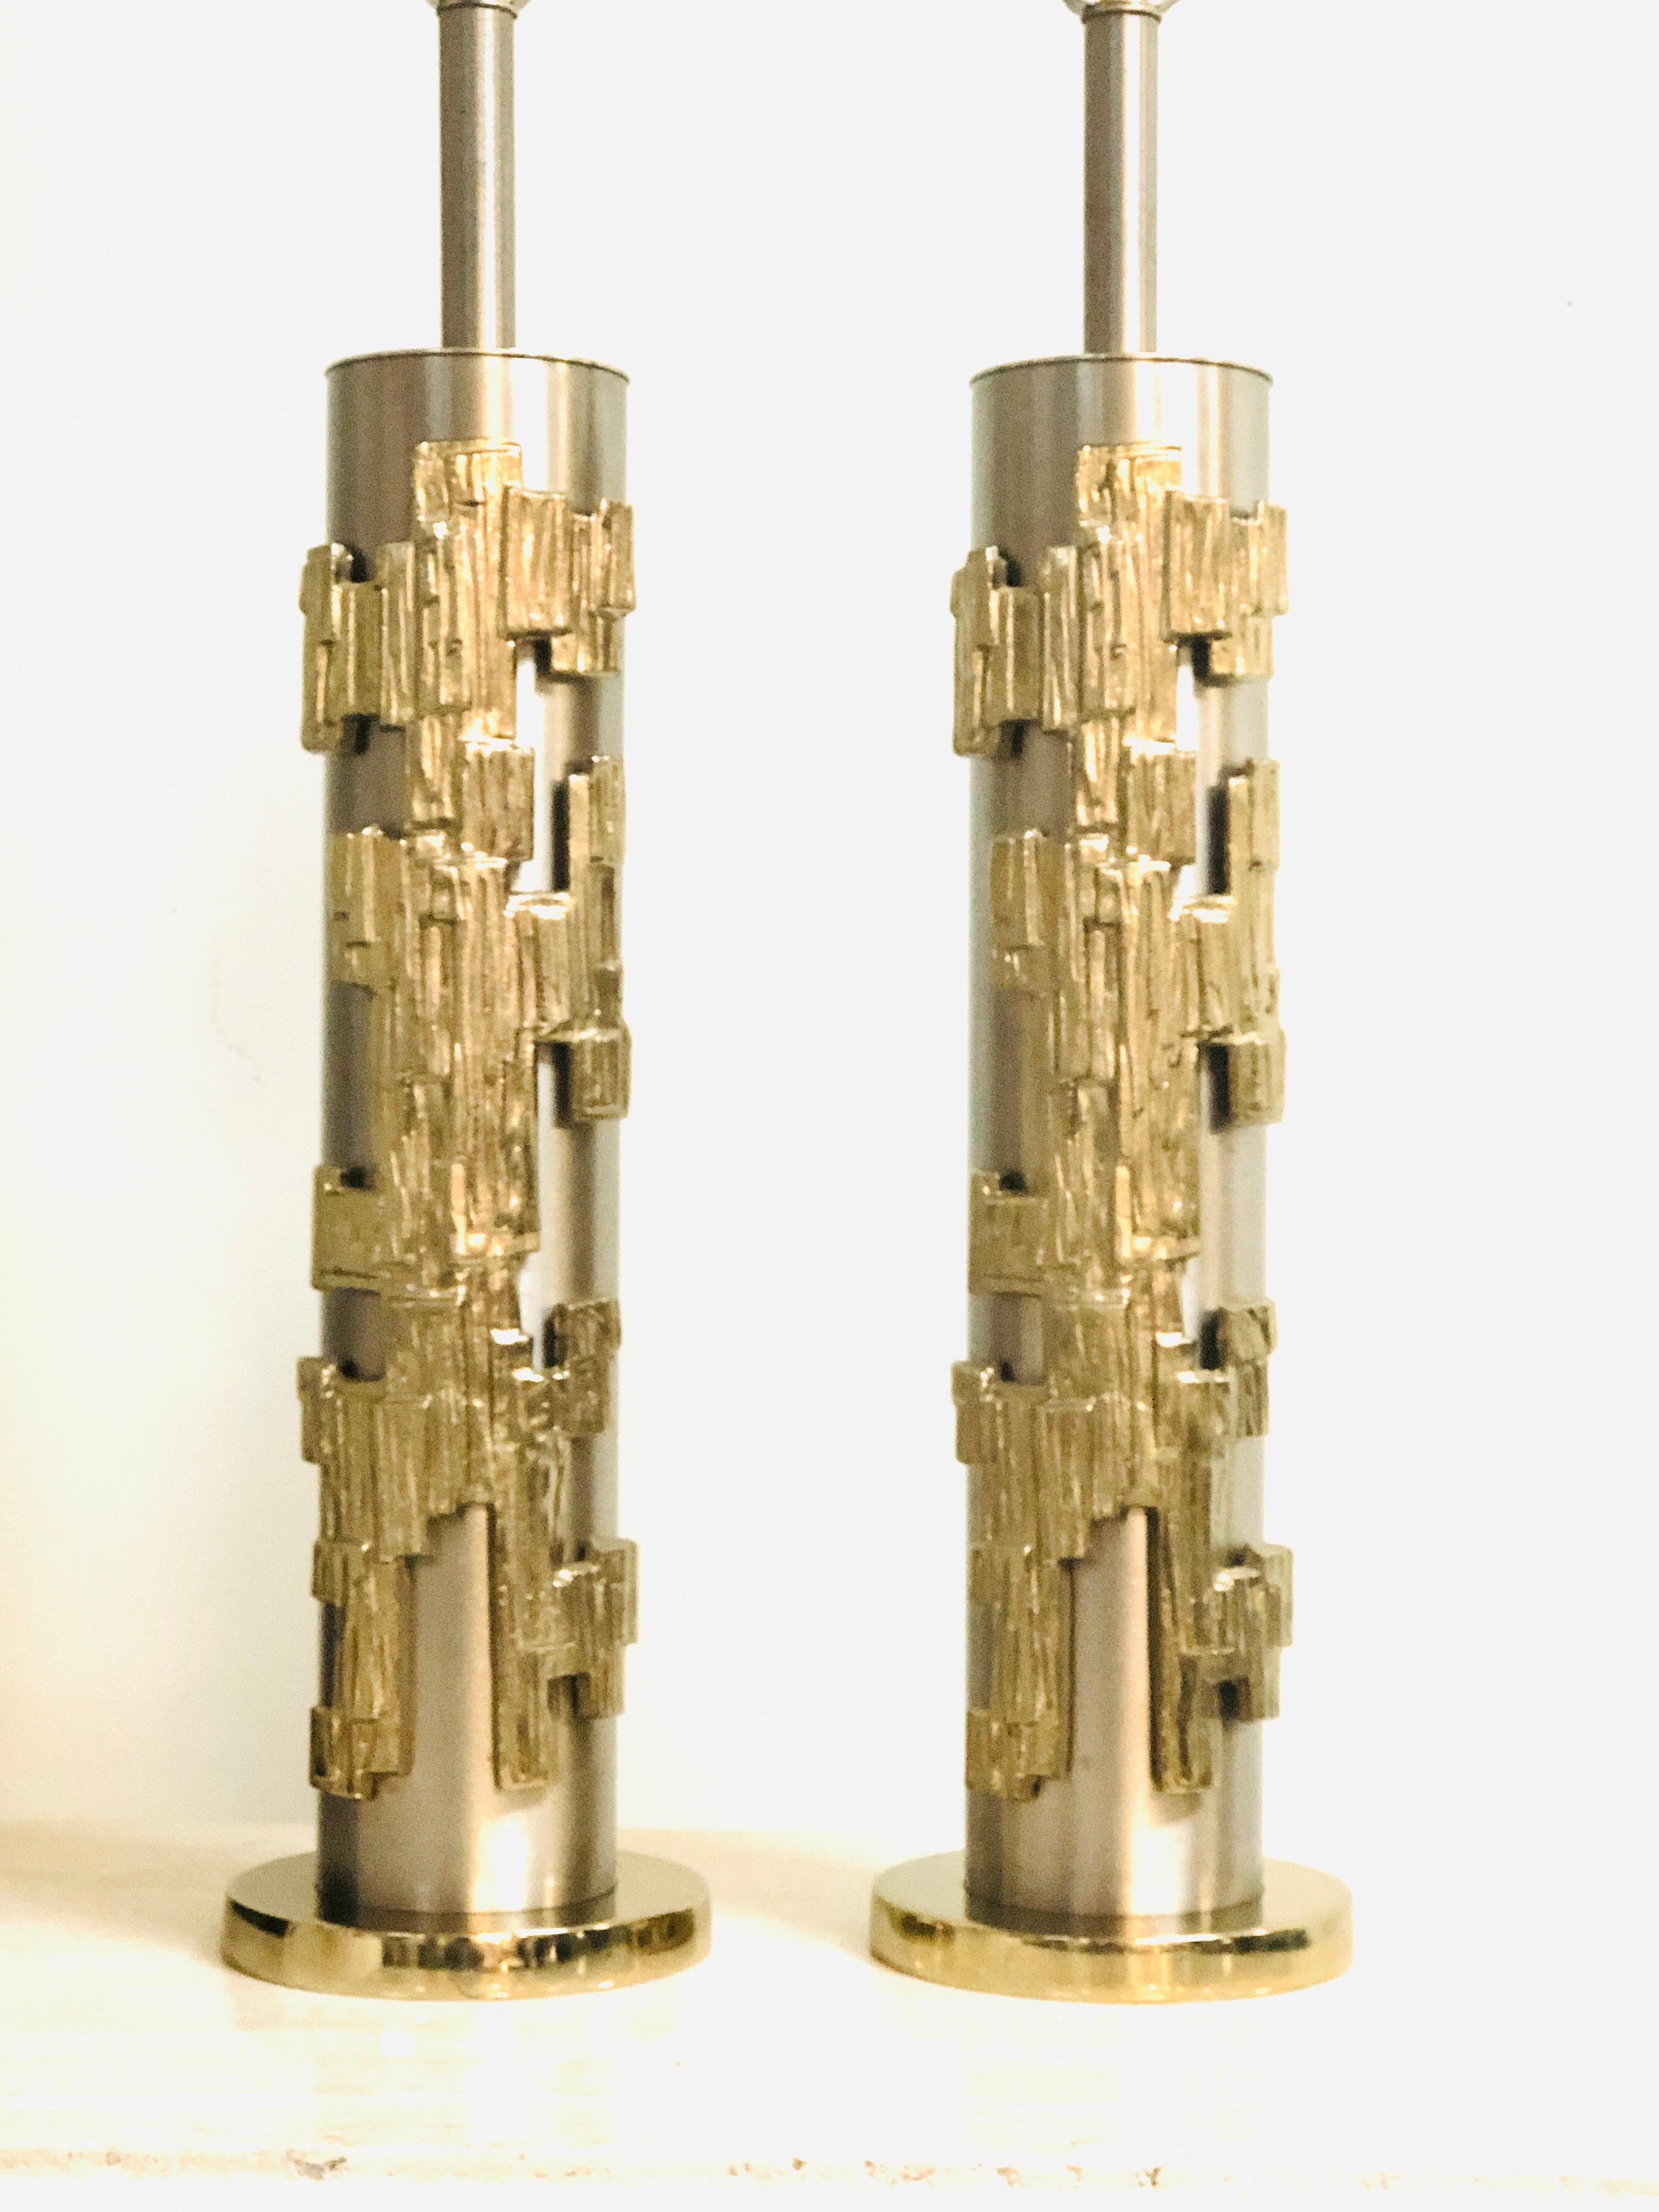 A pair of modernist table lamps by Laurel. The cylindrical bodies have a brushed nickel finished. The abstract sculptural elements are done in an light brass finish. Stunning lamps. 37